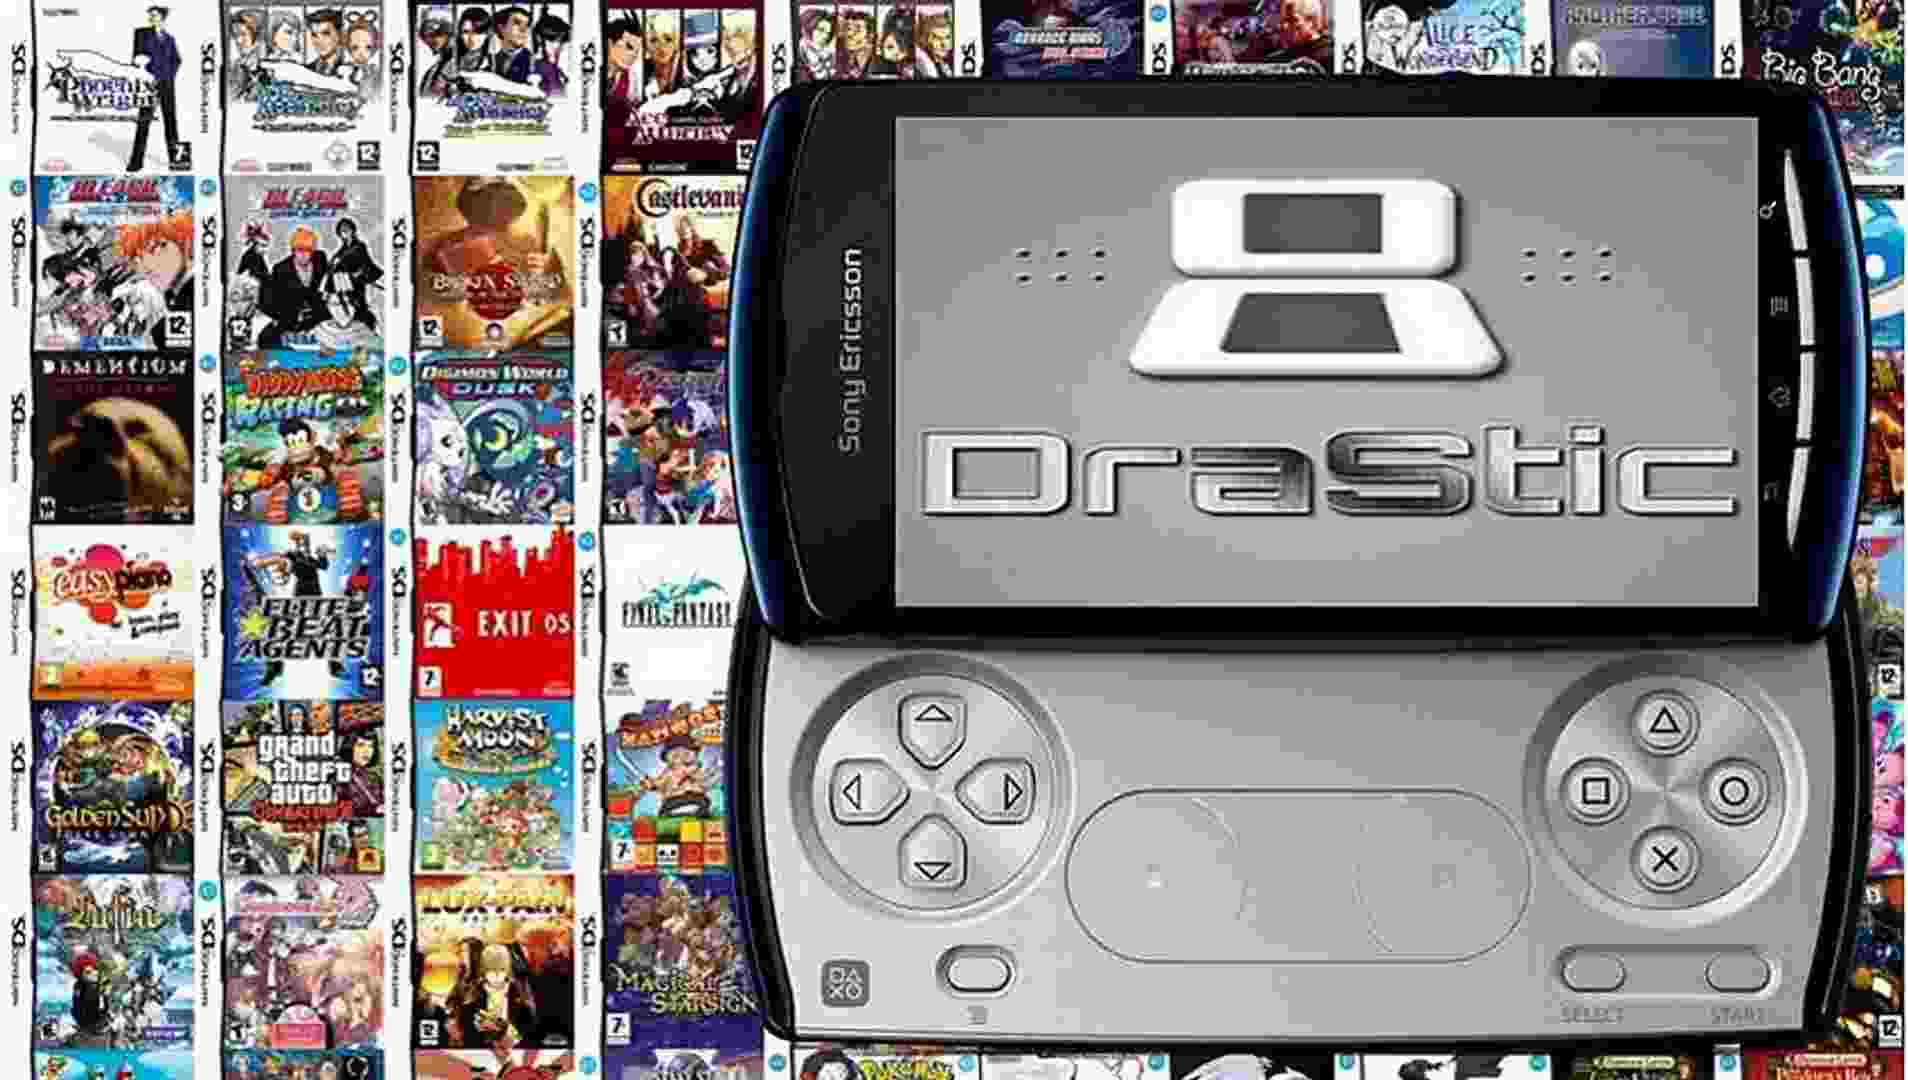 drastic ds emulator free download with bios